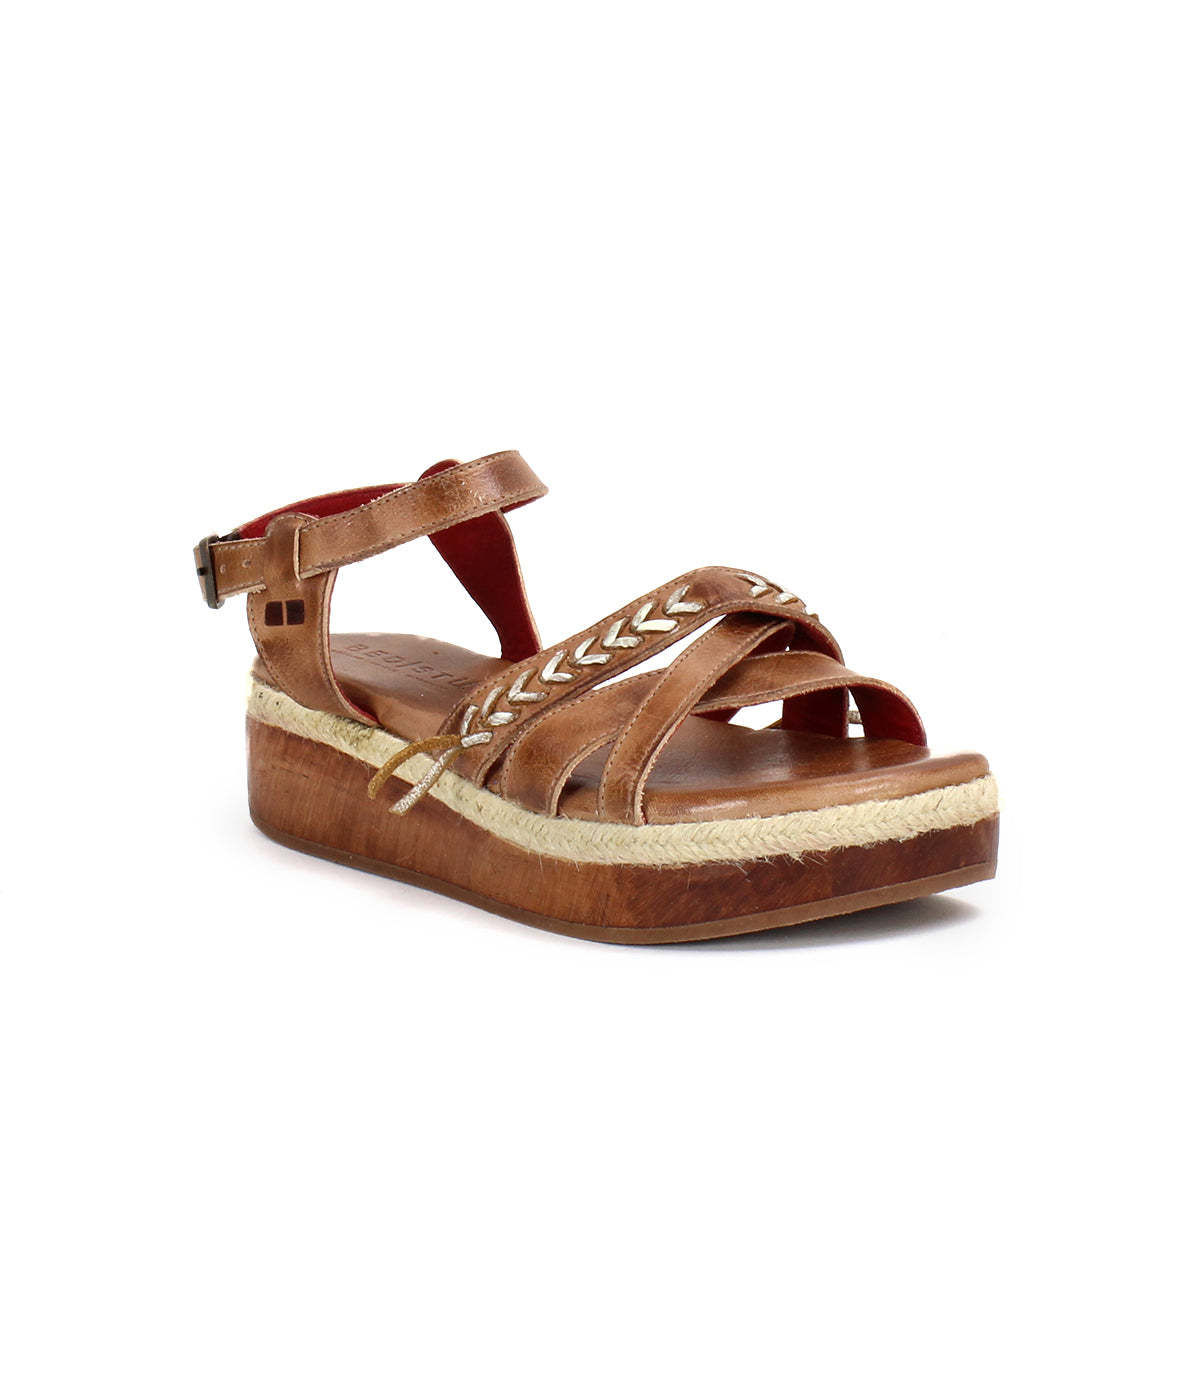 Brown women's espadrille sandal with stylish stitched straps and ankle strap by Bed Stu Necessary.